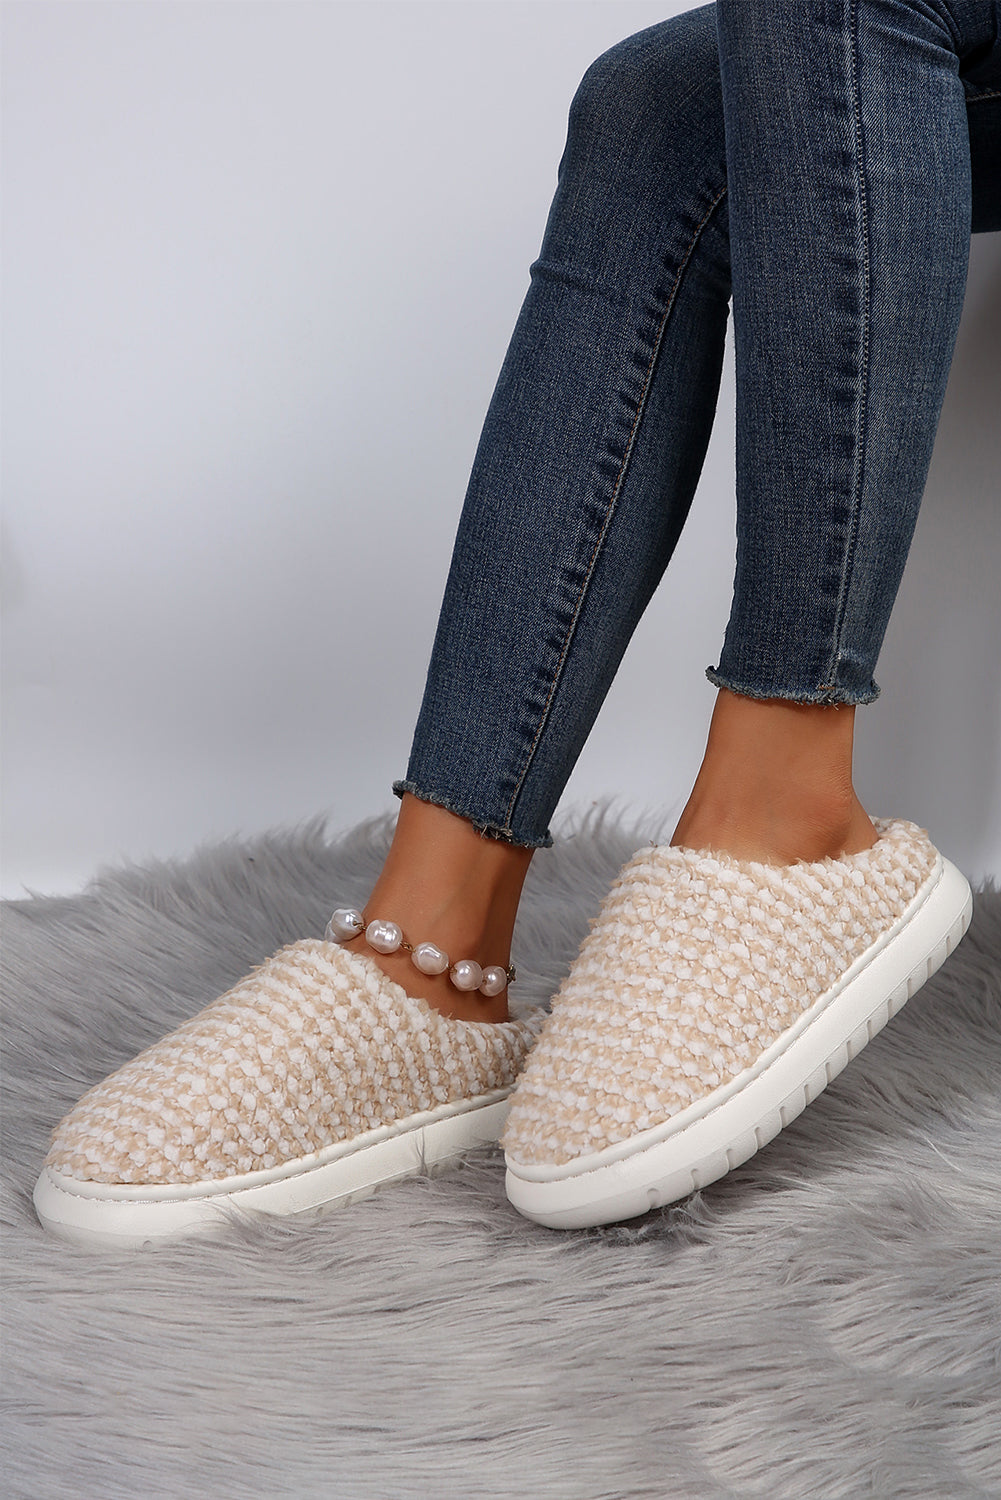 Apricot khaki Two-tone Knitted Warm Homewear Slippers Slippers JT's Designer Fashion